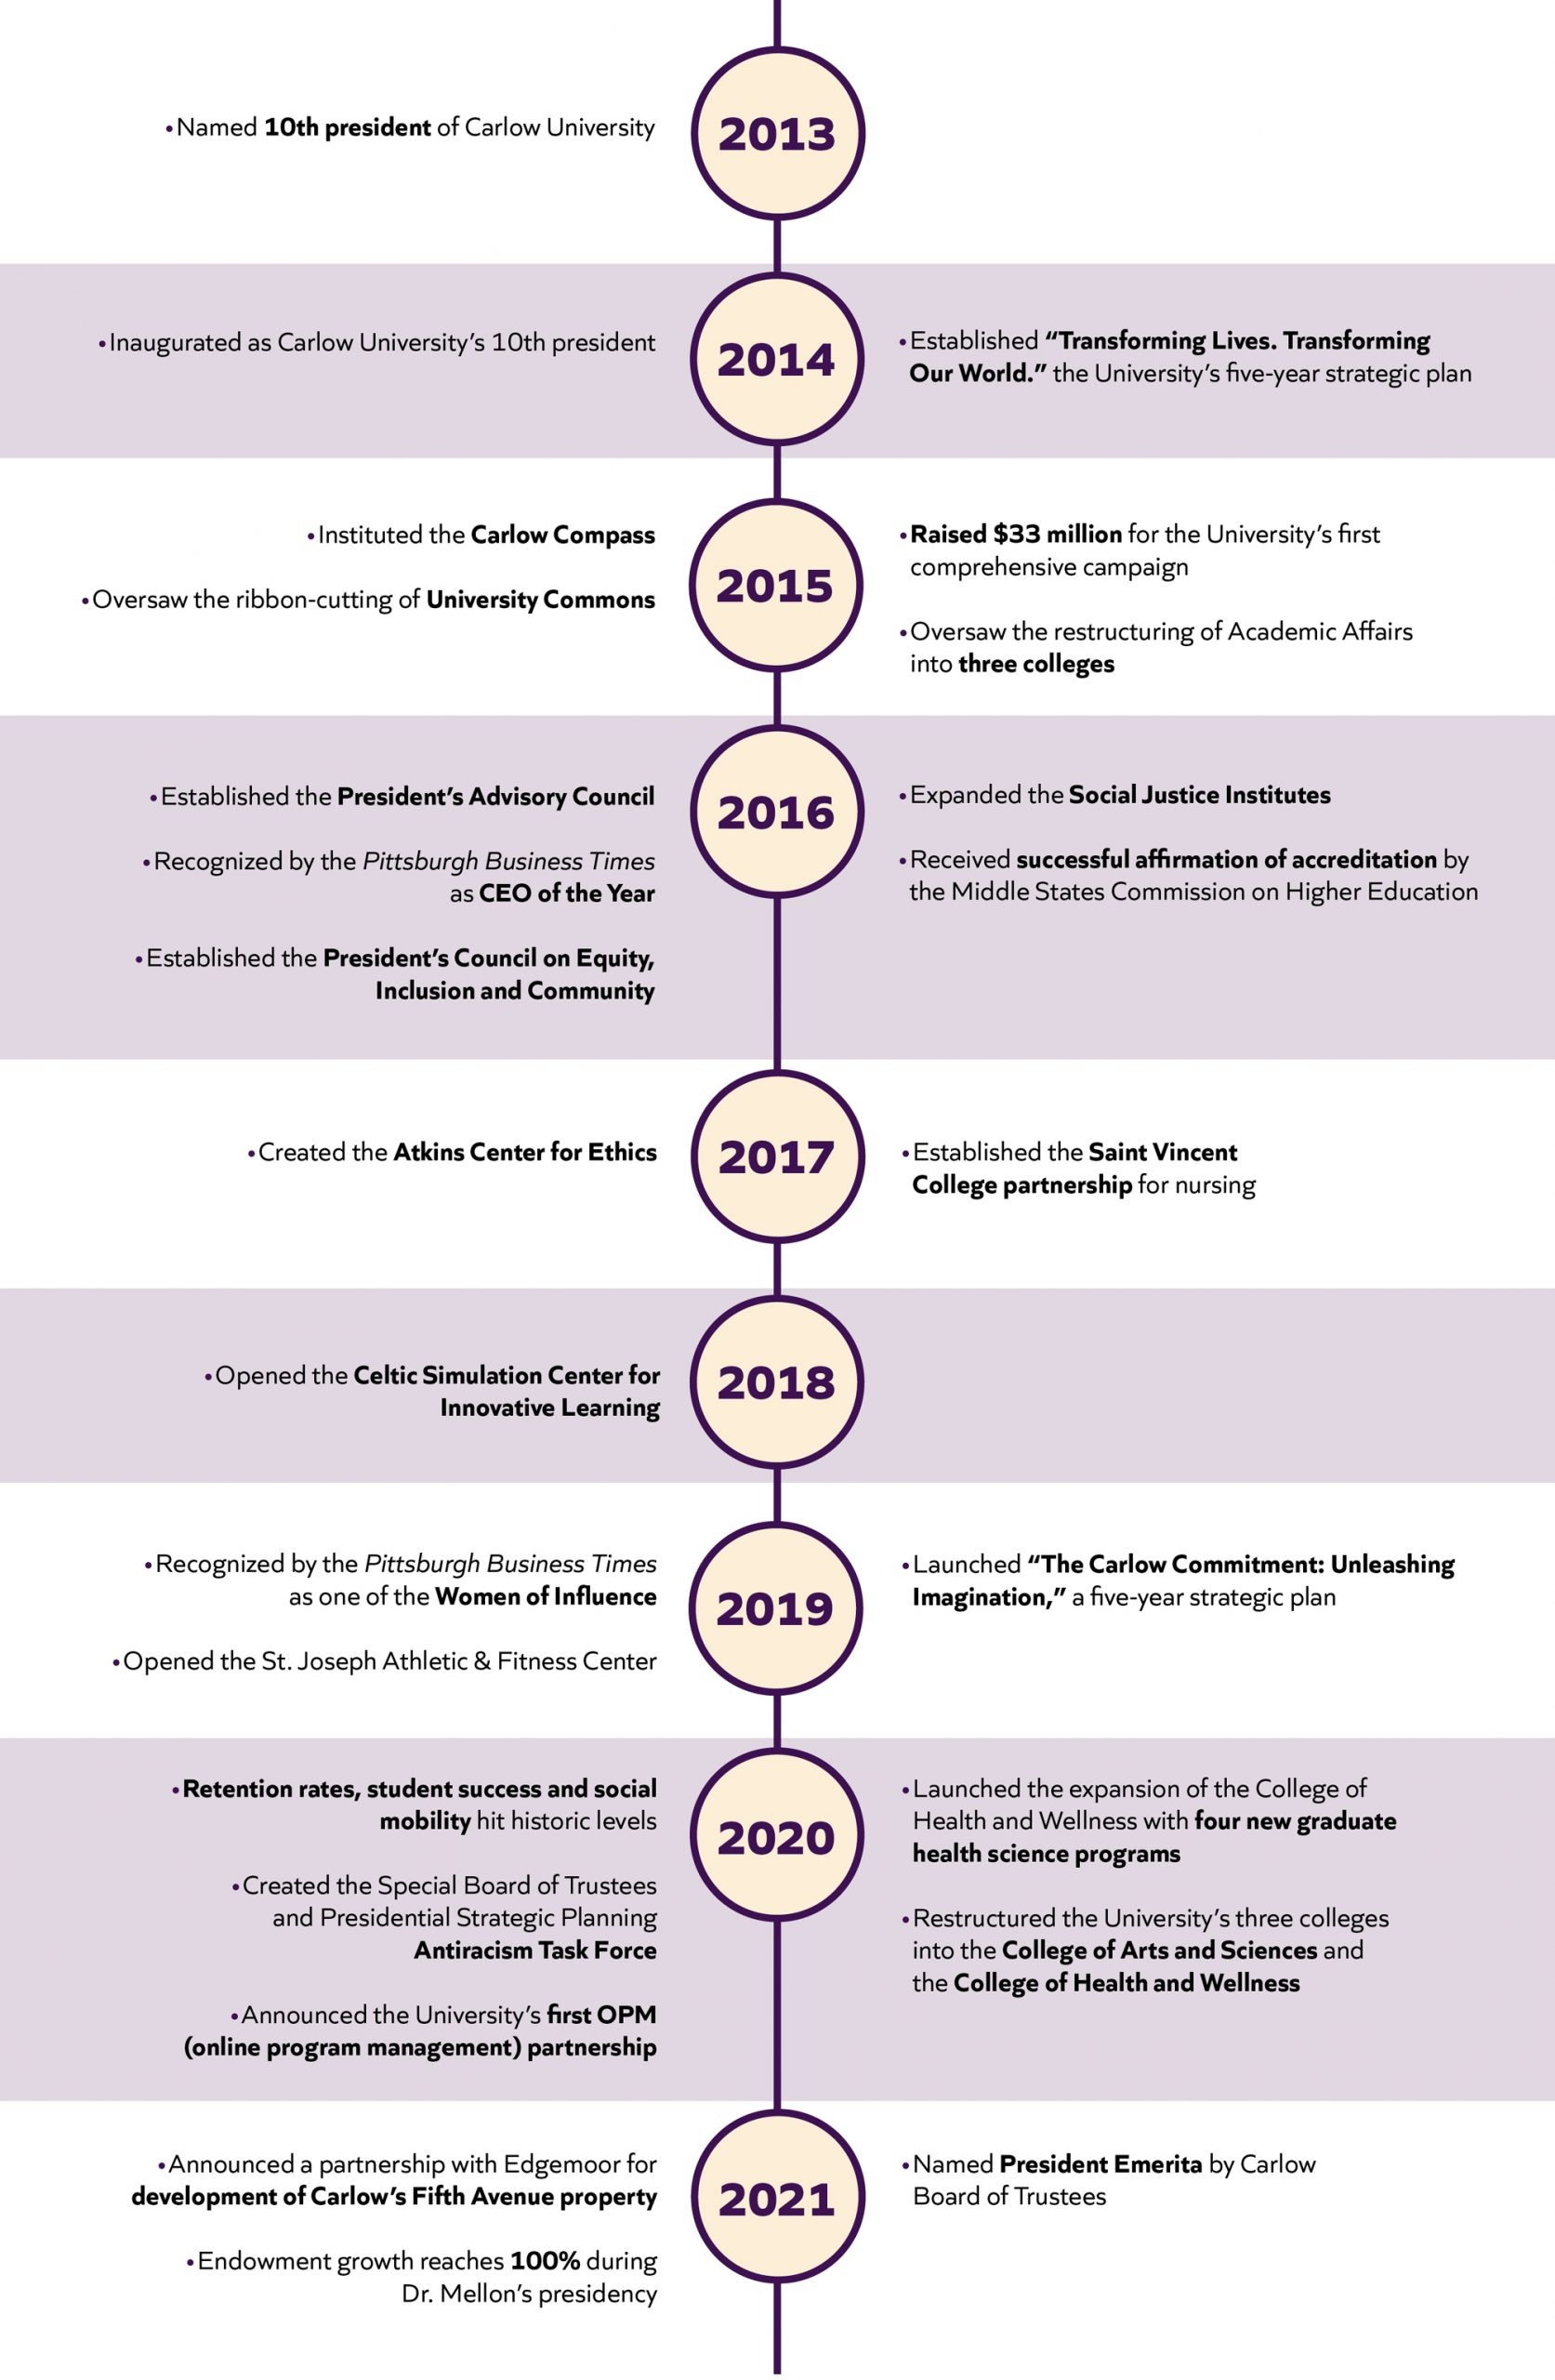 Illustrated timeline of events from President Mellon's presidency. The dates range from 2013-2021.